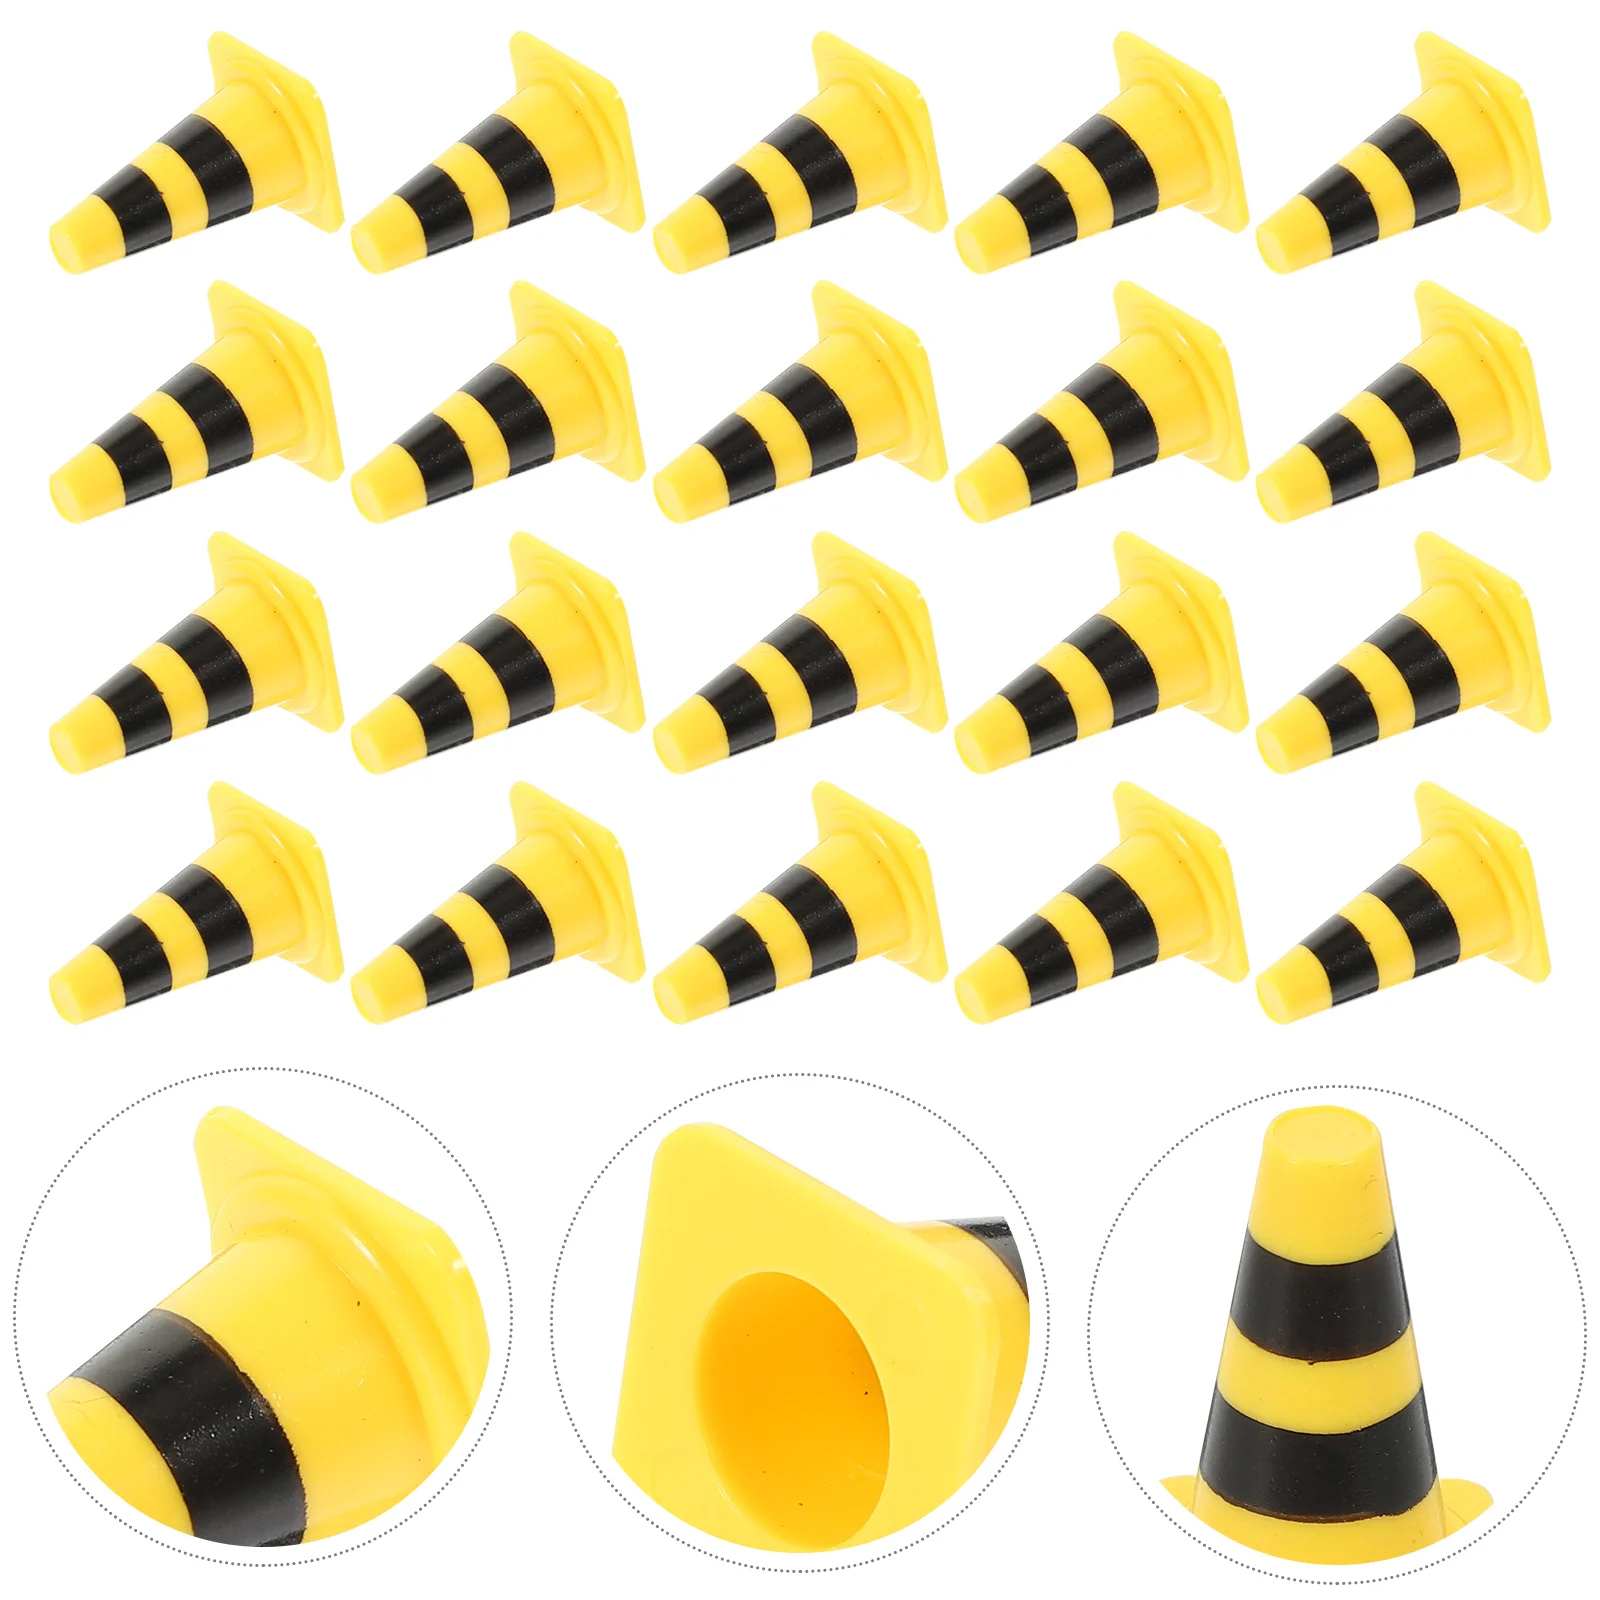 30pcs Miniature Traffic Cones Roadblock Sign Toy Kids Traffic Cognitive Toys 30 pcs warning cone model children’s toys traffic roadblock safety for kids mini cognitive abs